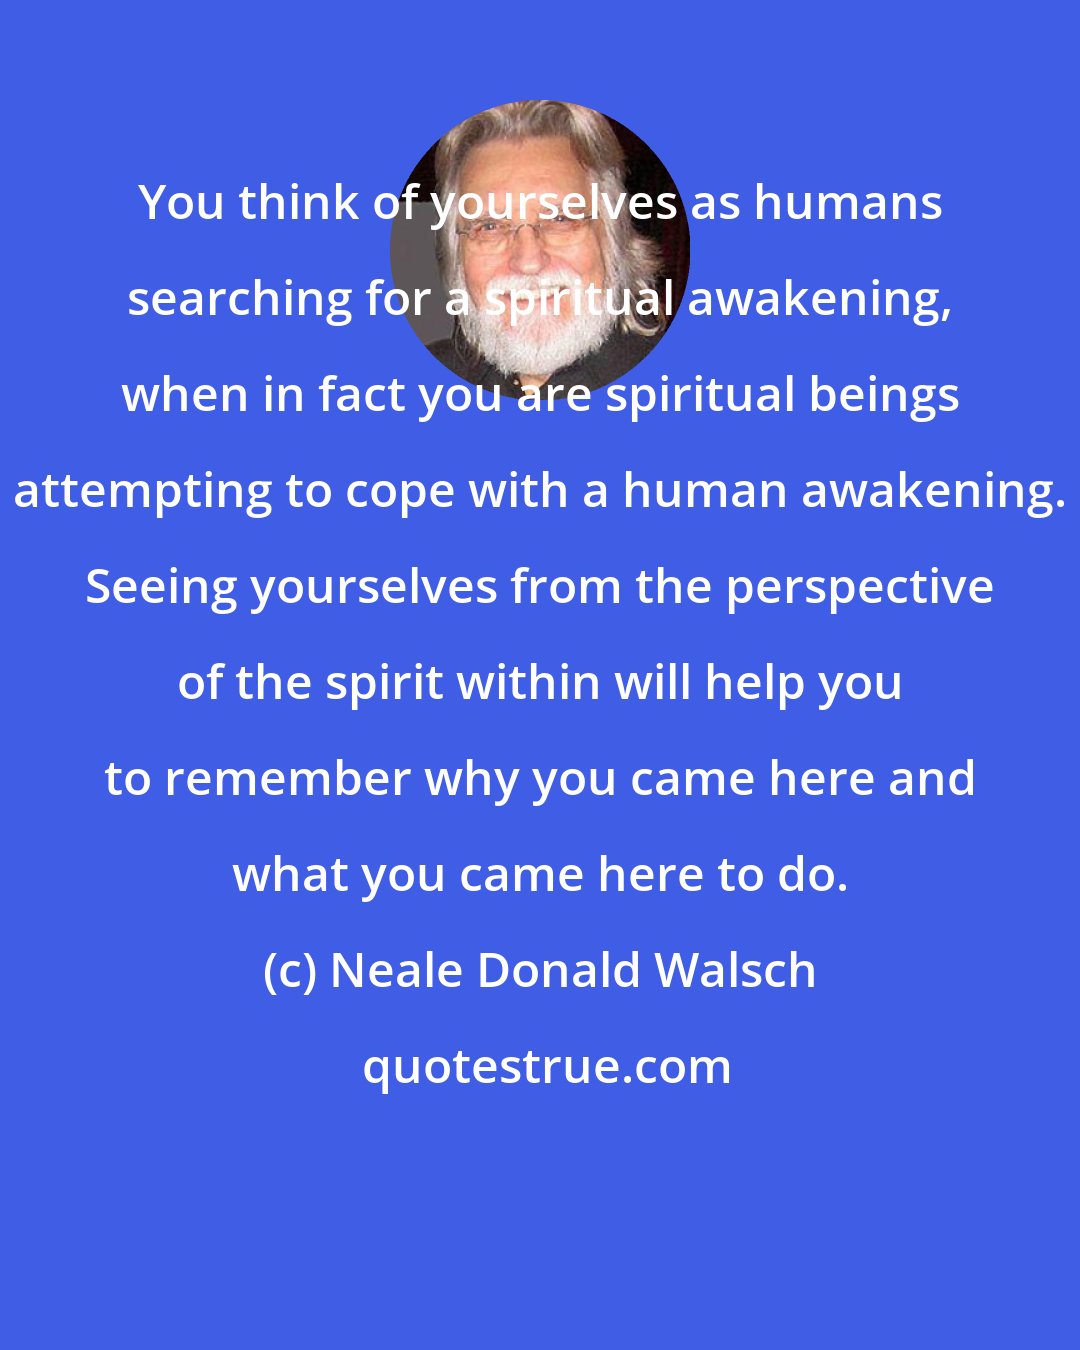 Neale Donald Walsch: You think of yourselves as humans searching for a spiritual awakening, when in fact you are spiritual beings attempting to cope with a human awakening. Seeing yourselves from the perspective of the spirit within will help you to remember why you came here and what you came here to do.